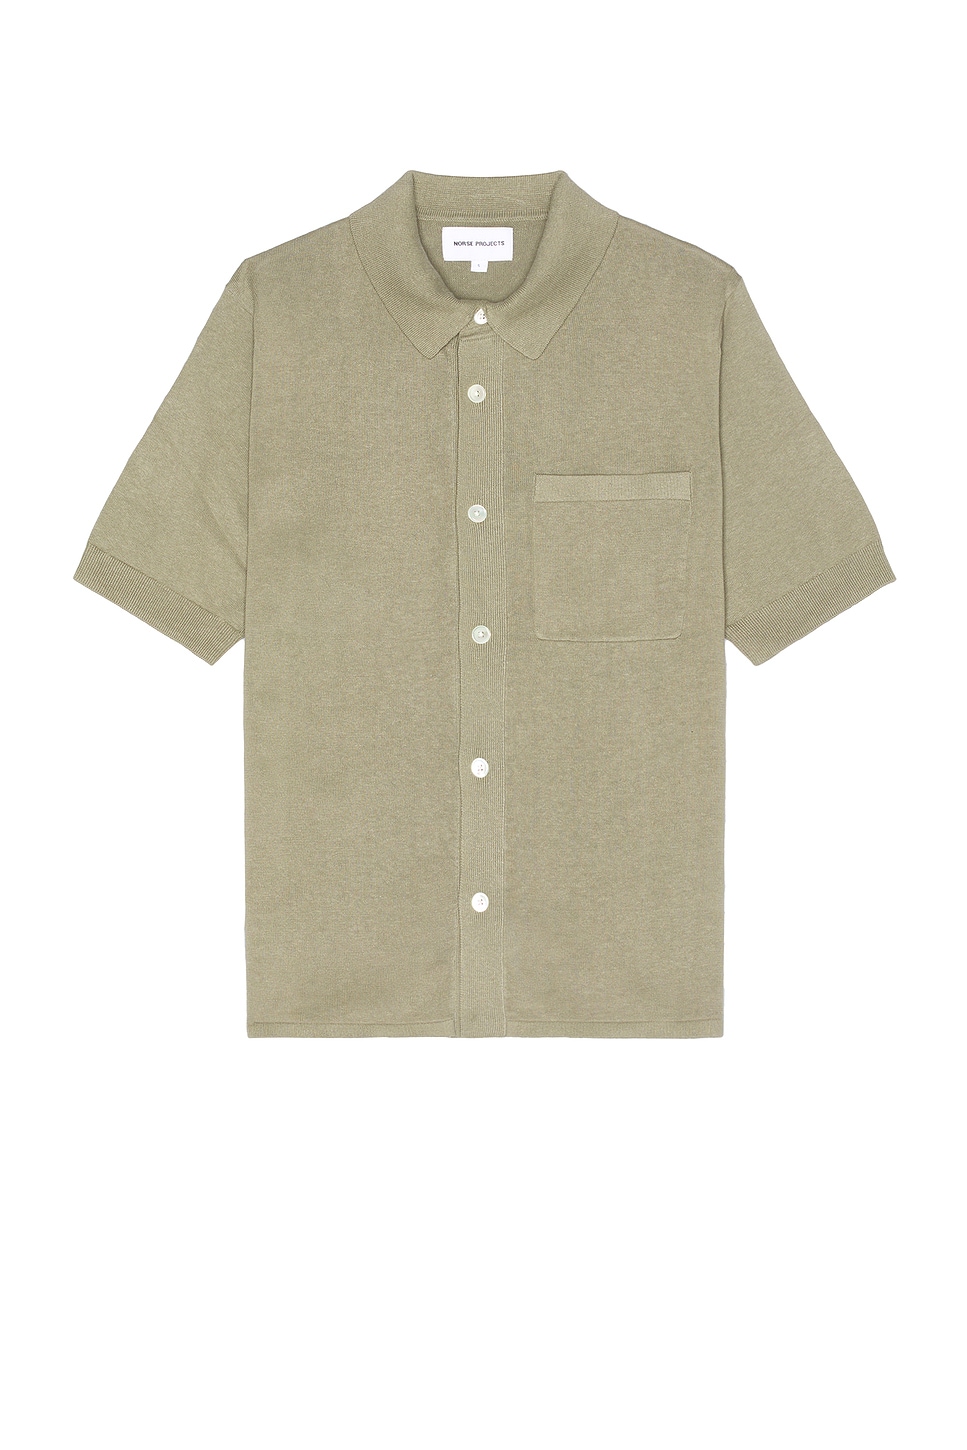 Image 1 of Norse Projects Rollo Cotton Linen Short Sleeve Shirt in Clay